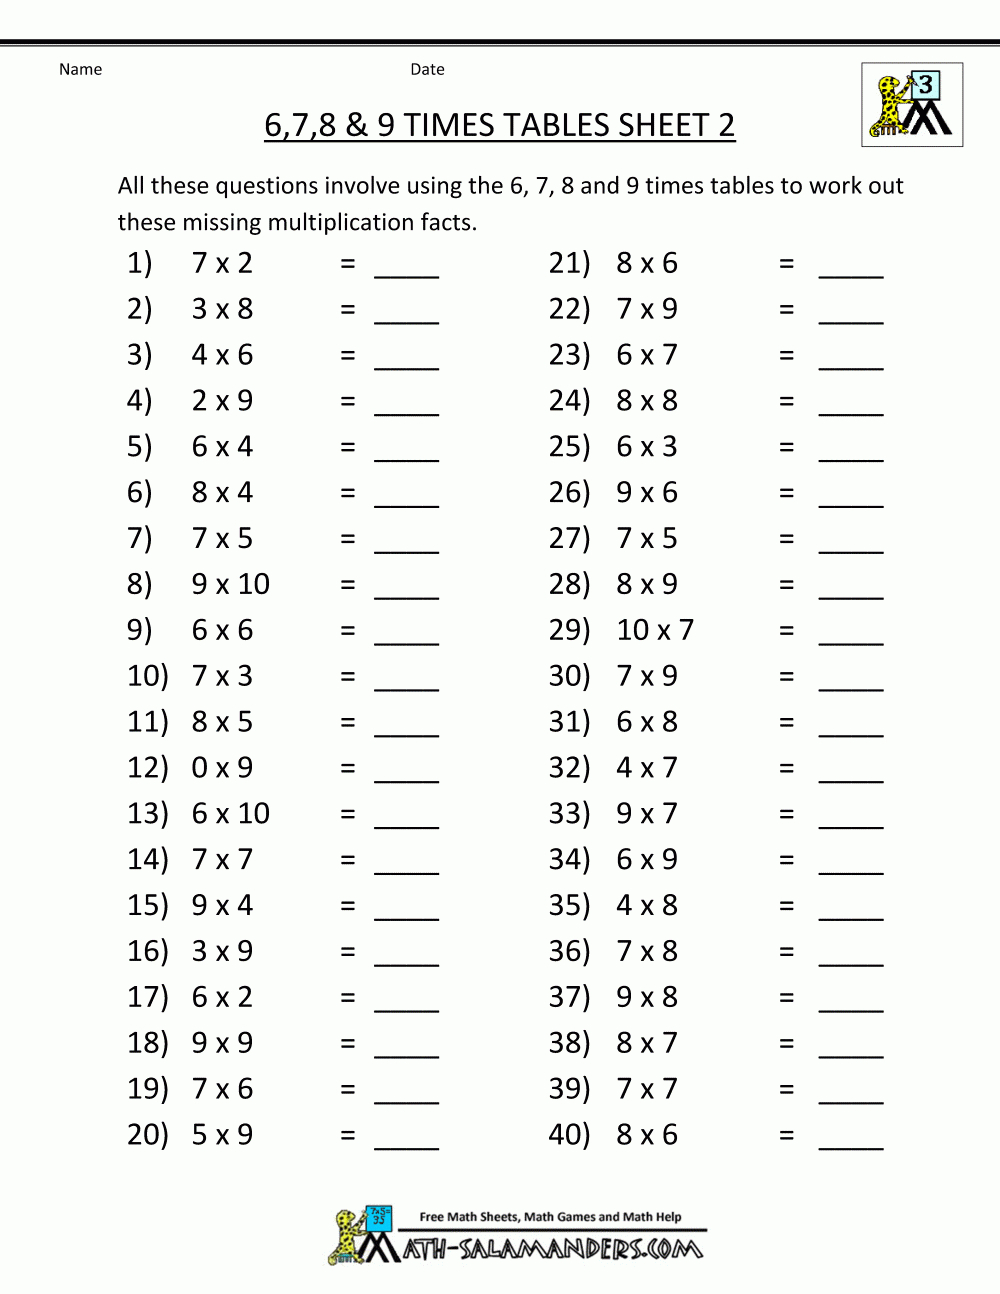 Free Math Sheets Multiplication 6 7 8 9 Times Tables 2 throughout Printable Multiplication Sheets Free